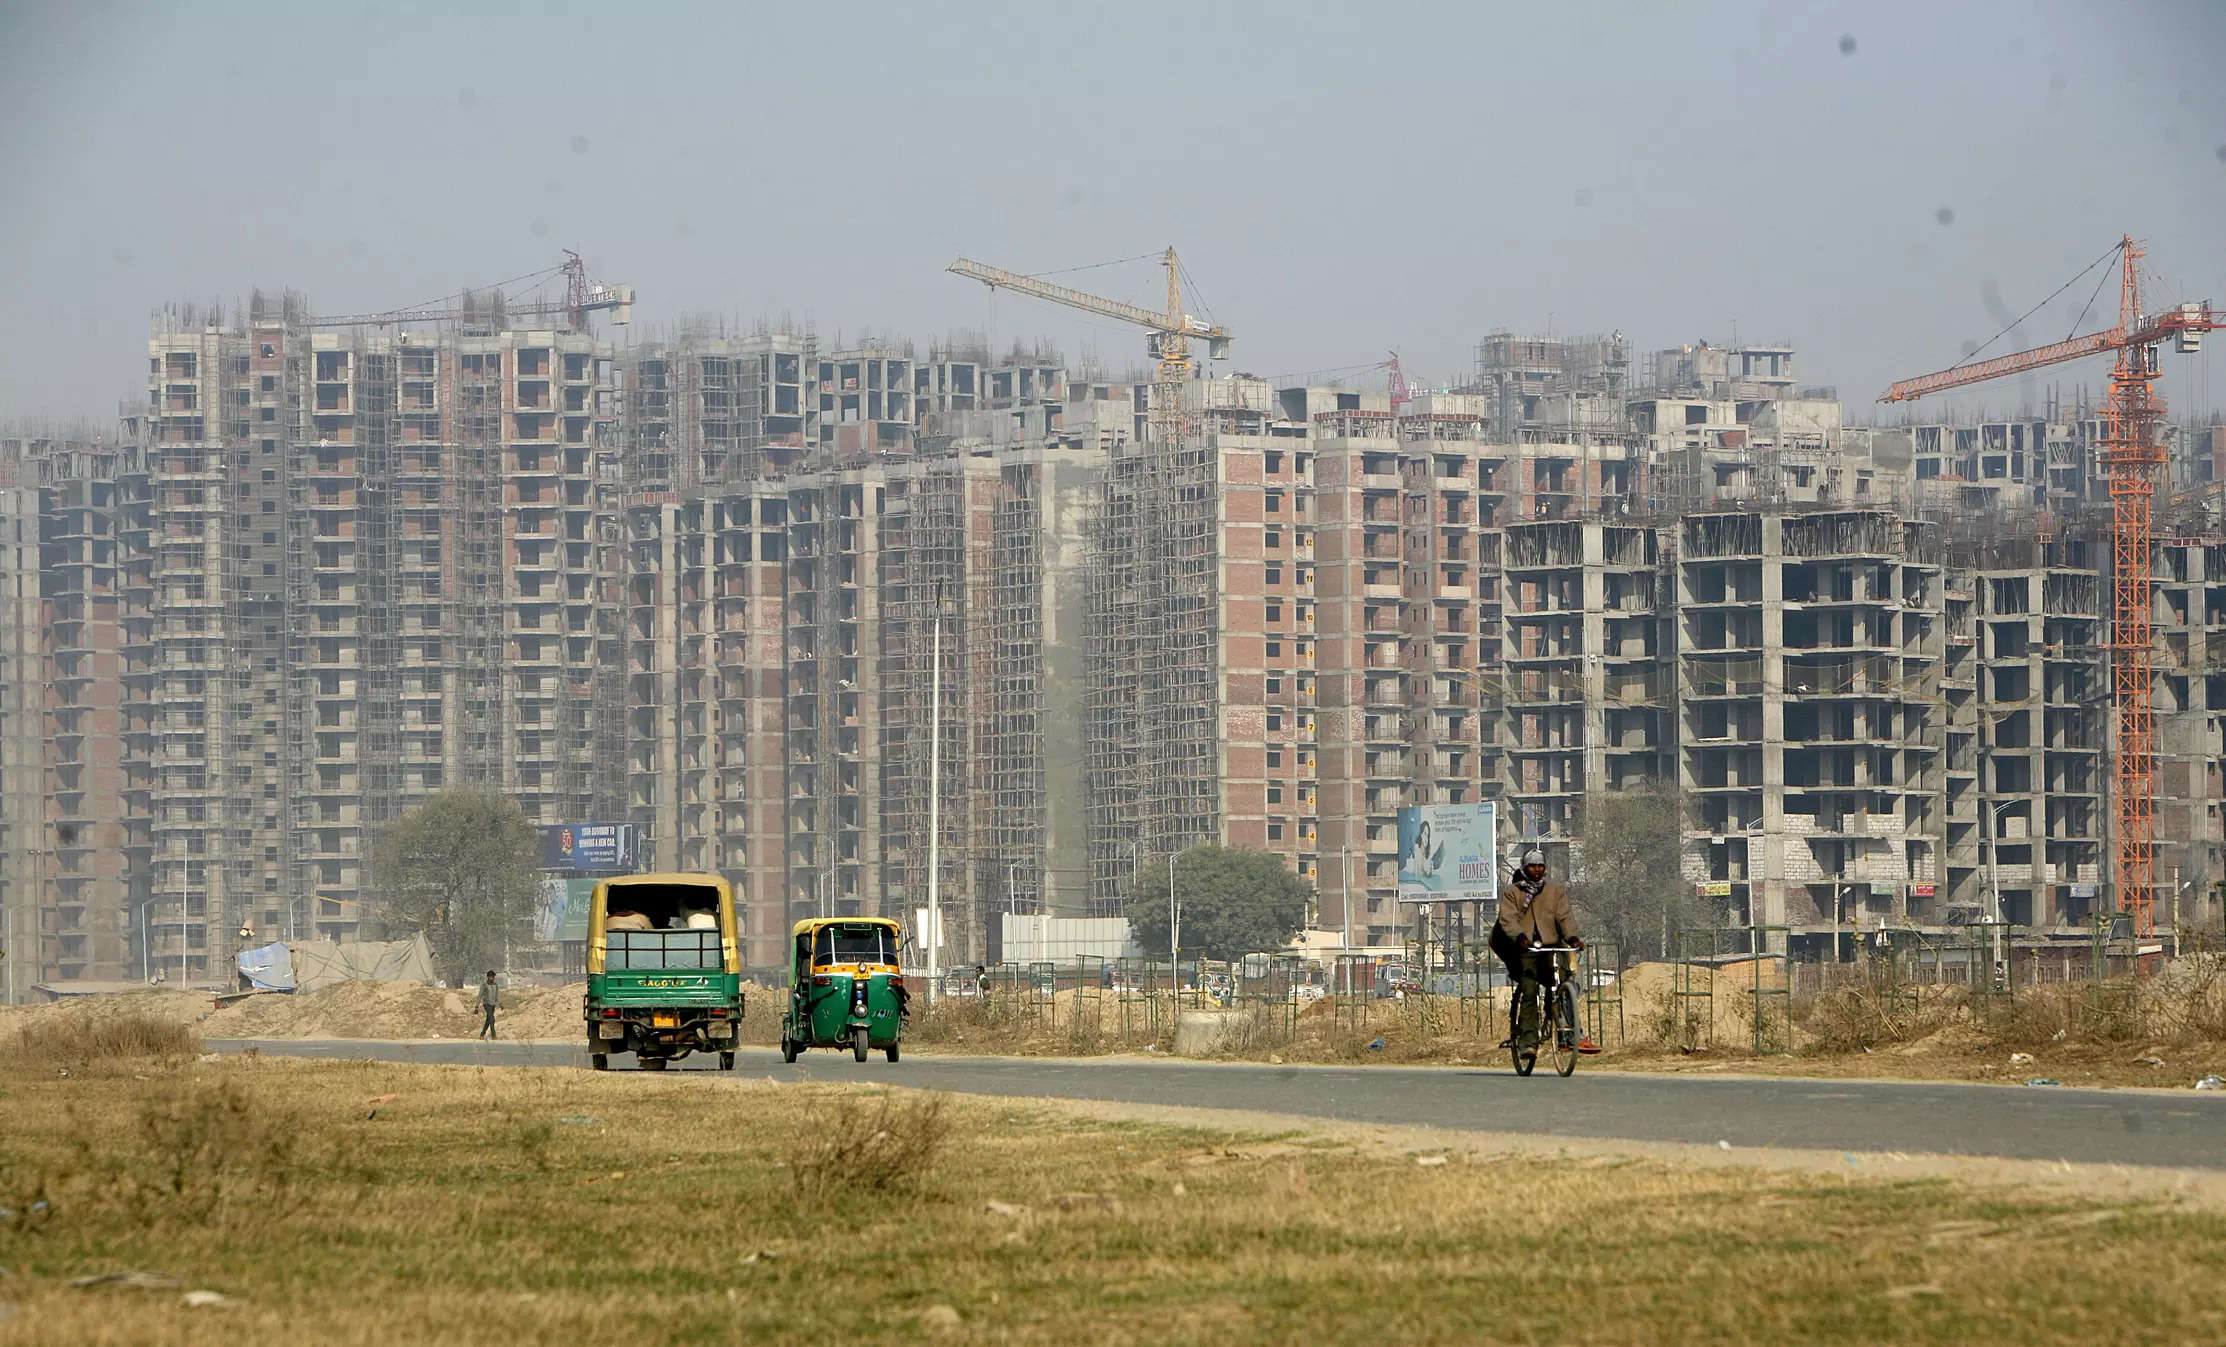 House prices rise in H1 2022 for first time since 2015 in top 8 Indian cities